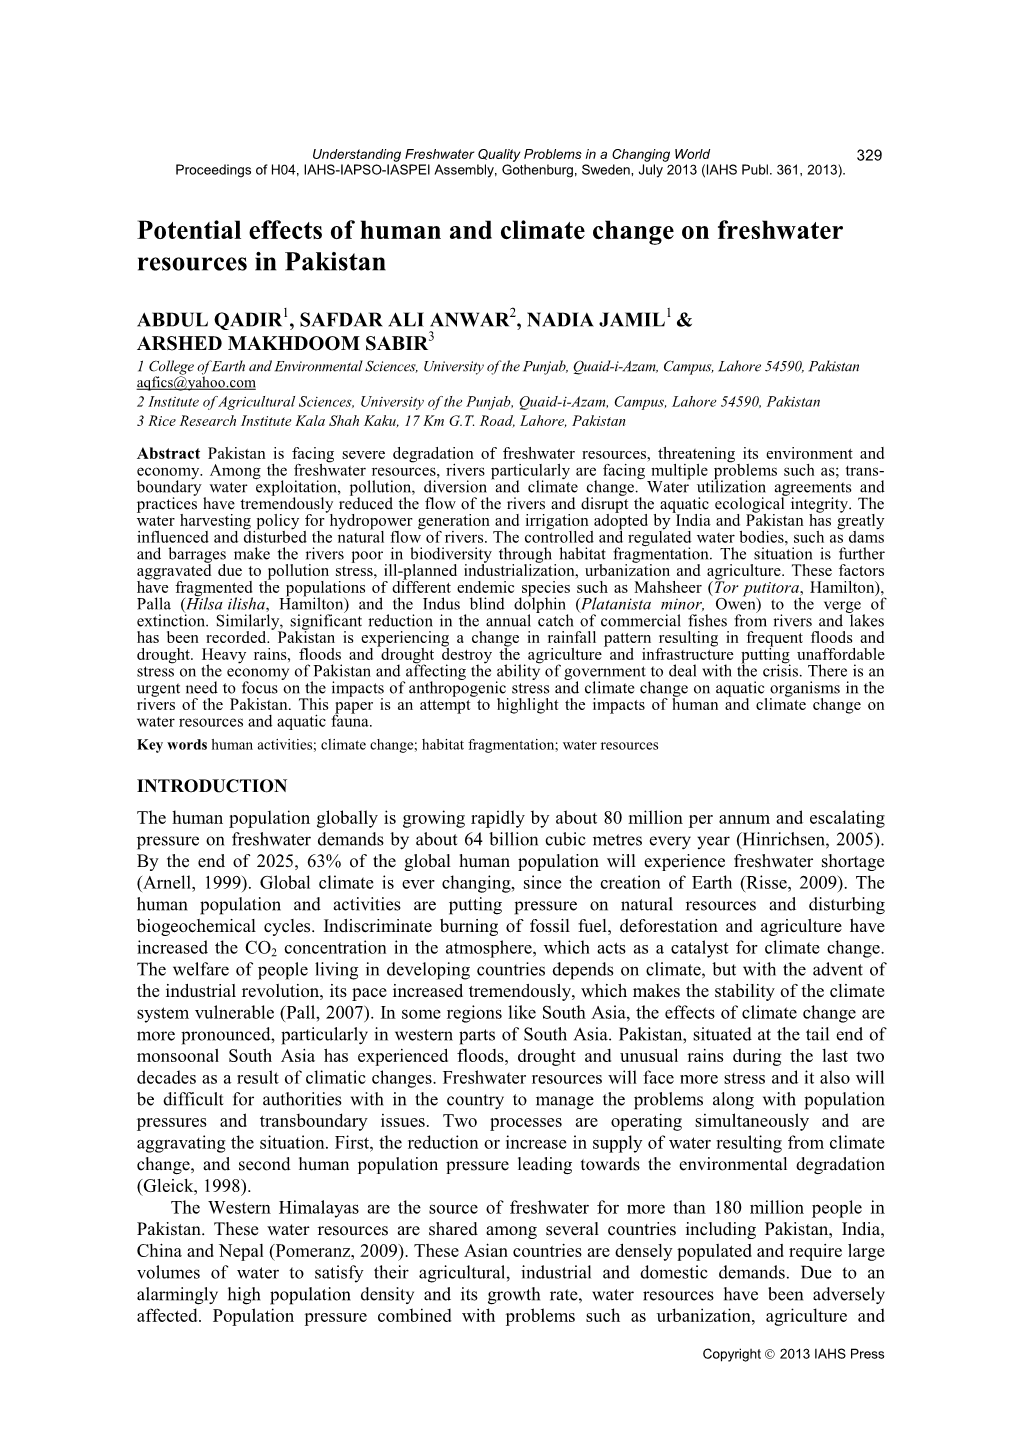 Potential Effects of Human and Climate Change on Freshwater Resources in Pakistan